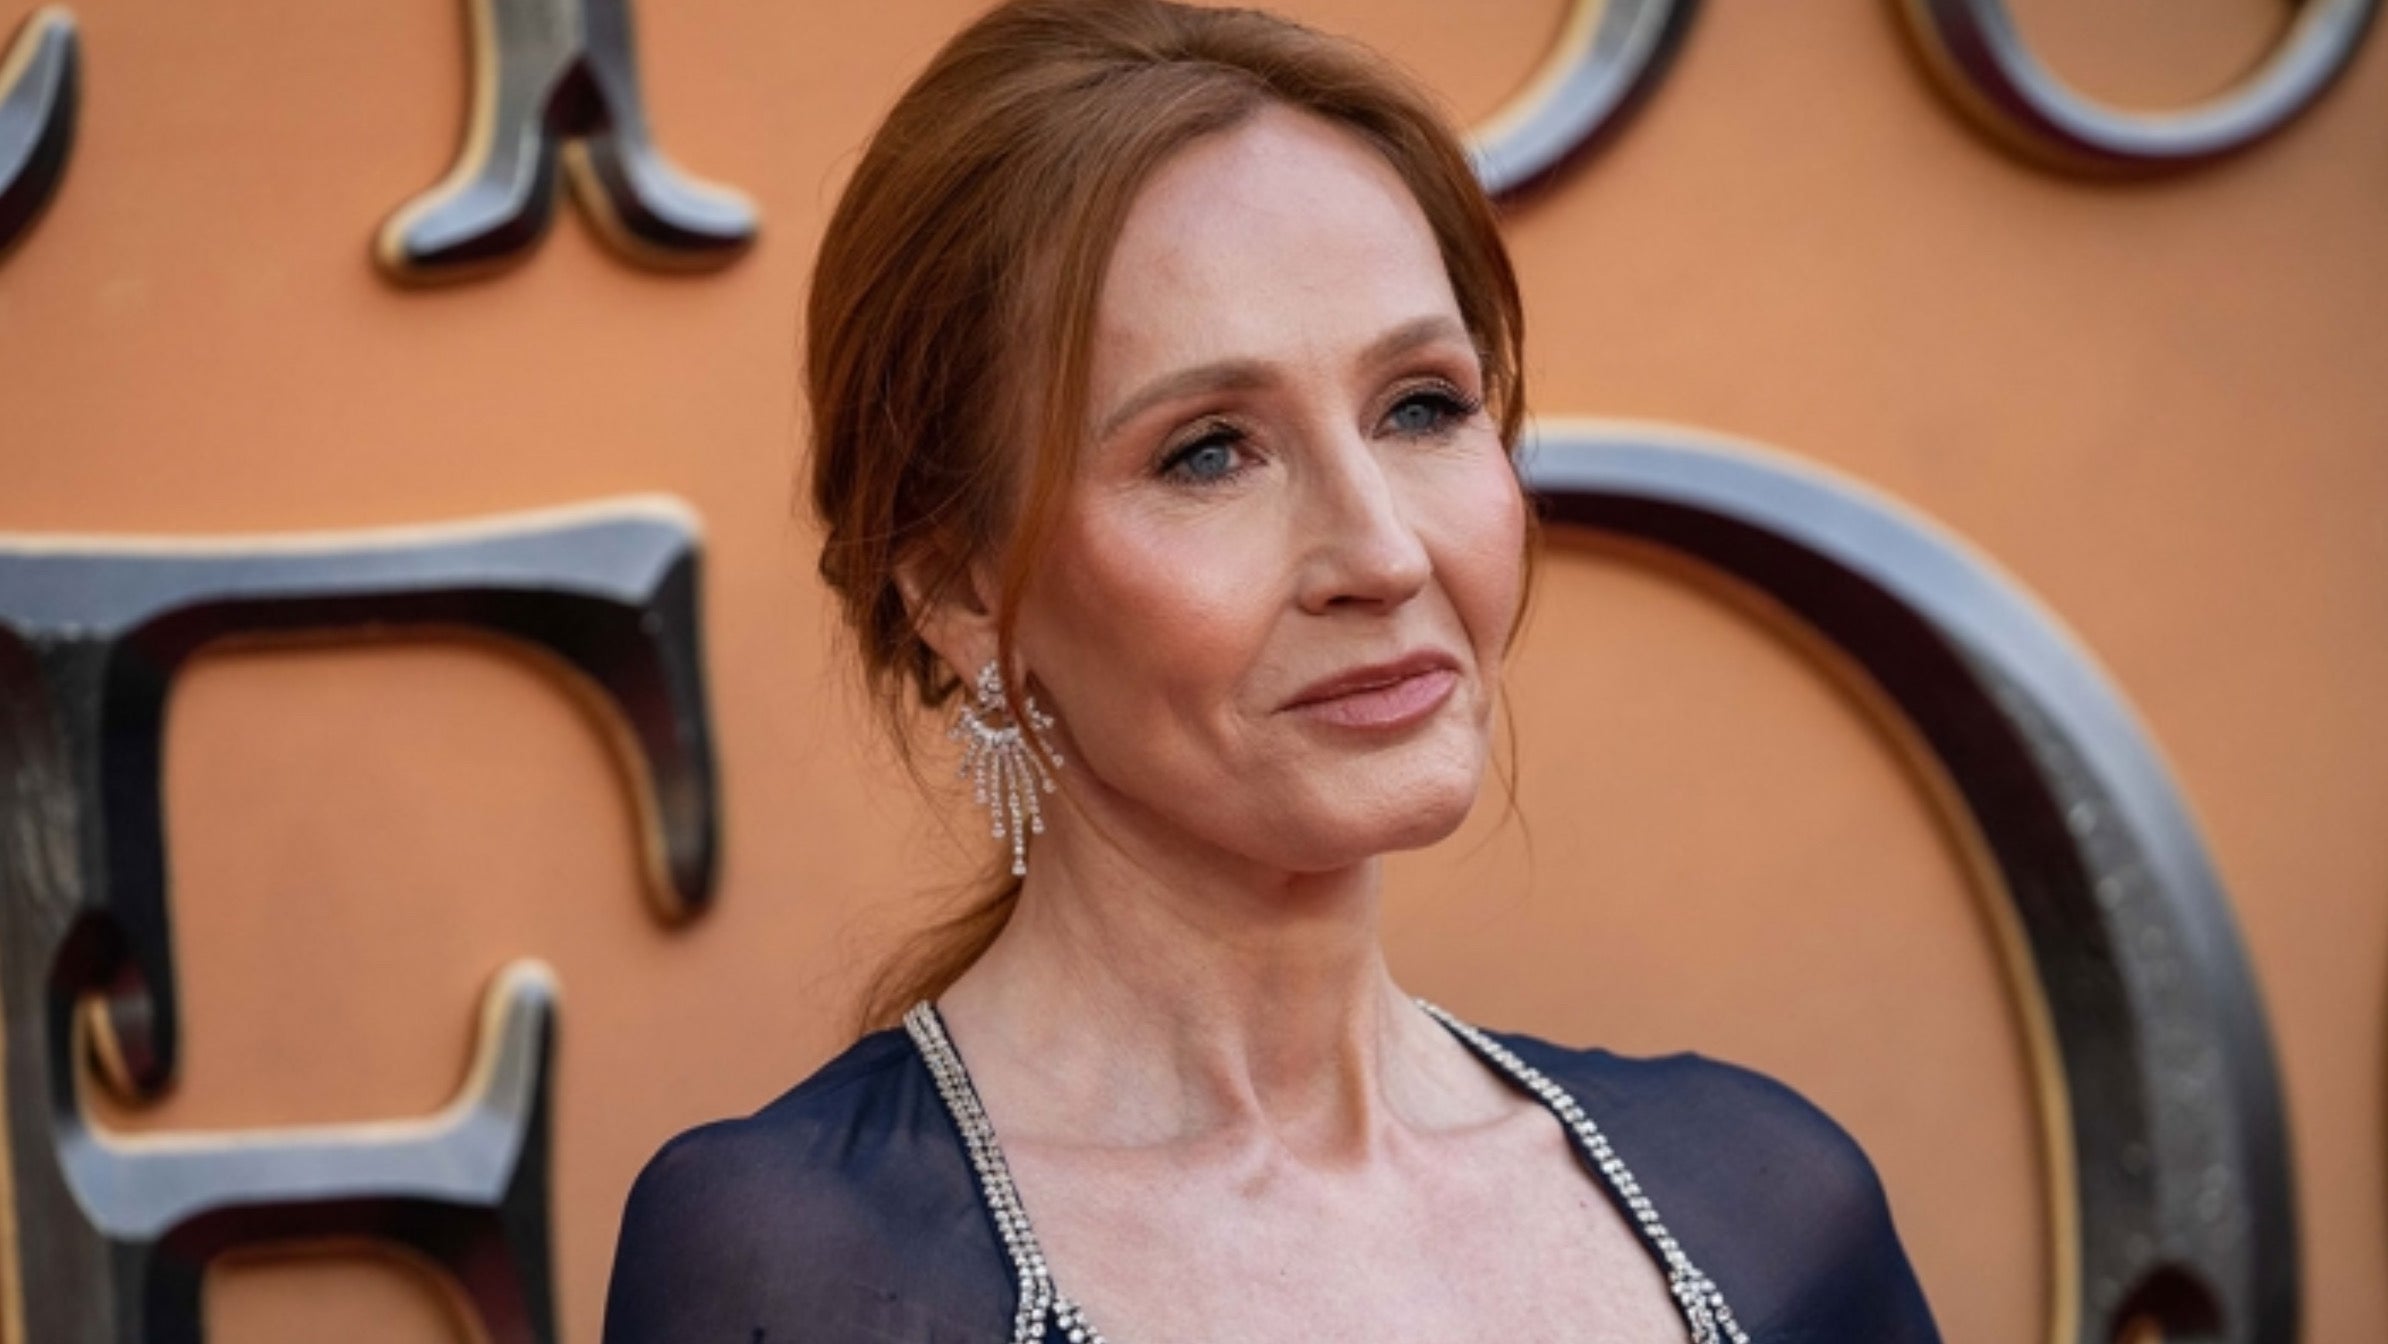 No matter, I’ll be dead: J.K. Rowling, accused of transphobia, mocks her heritage, Magnate Daily